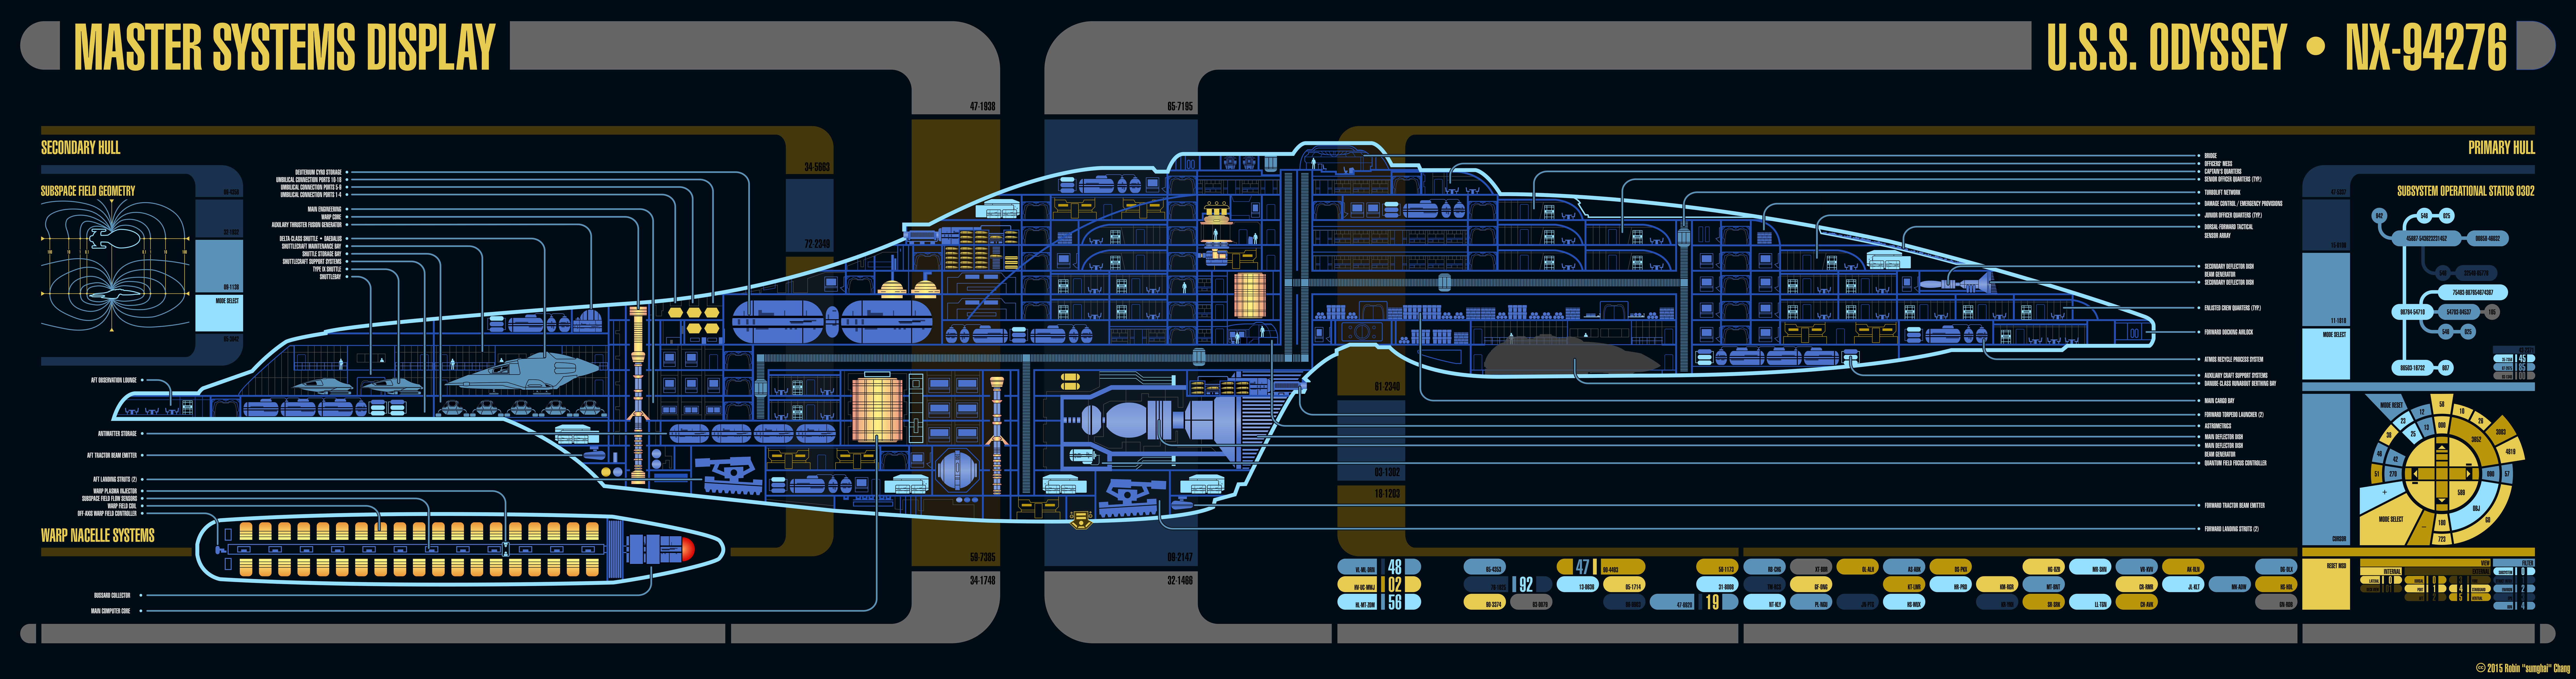 uss_odyssey__nx_94276____master_systems_display_by_sumghai-d79zqws.png